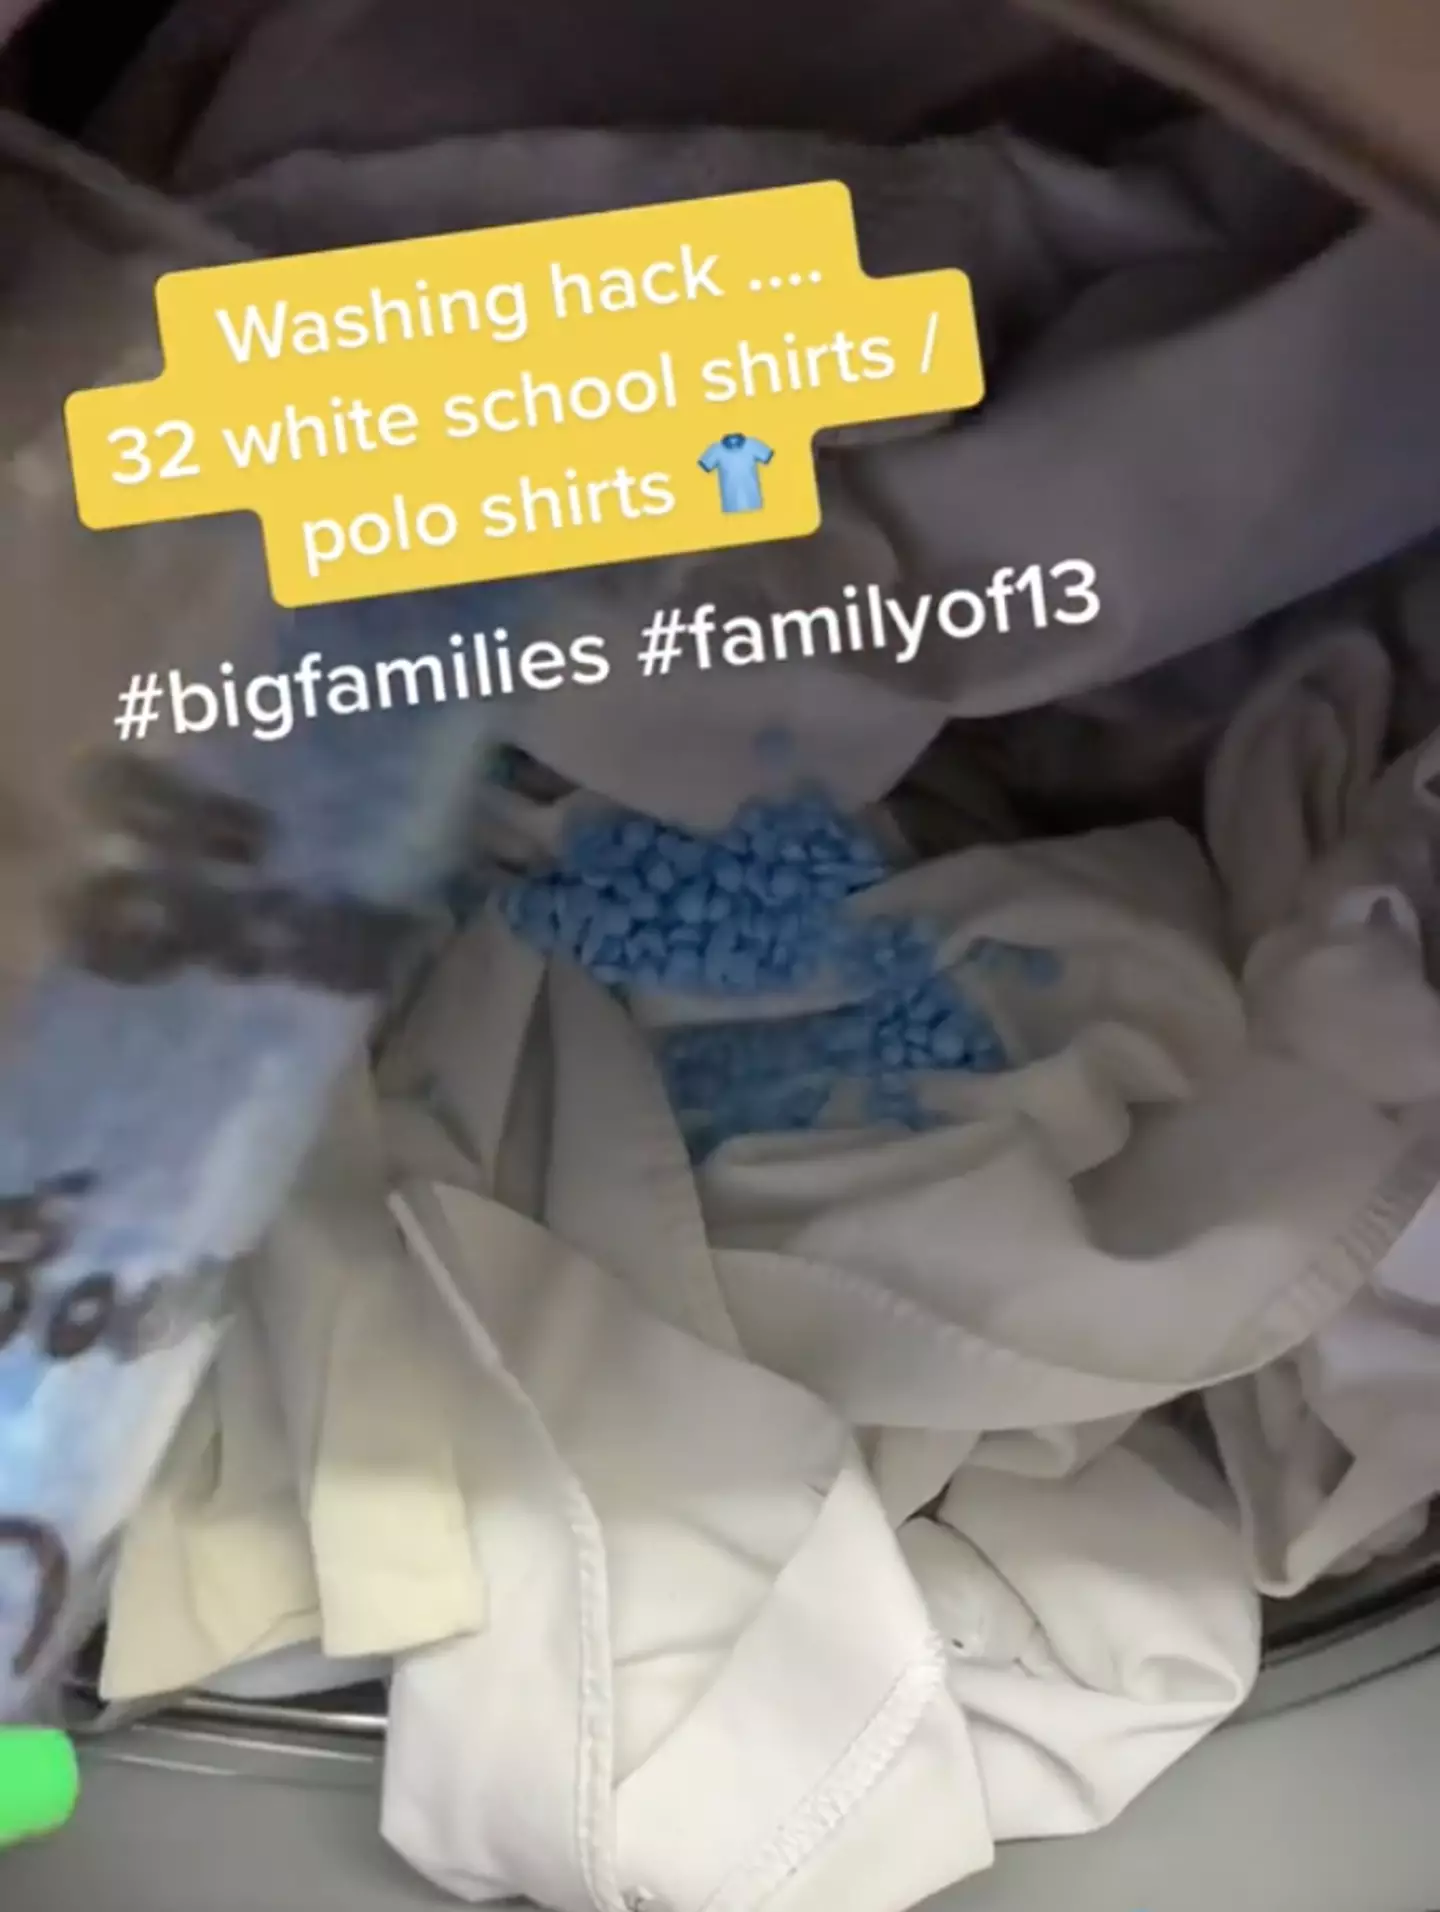 Joanne revealed her hack for washing school shirts.